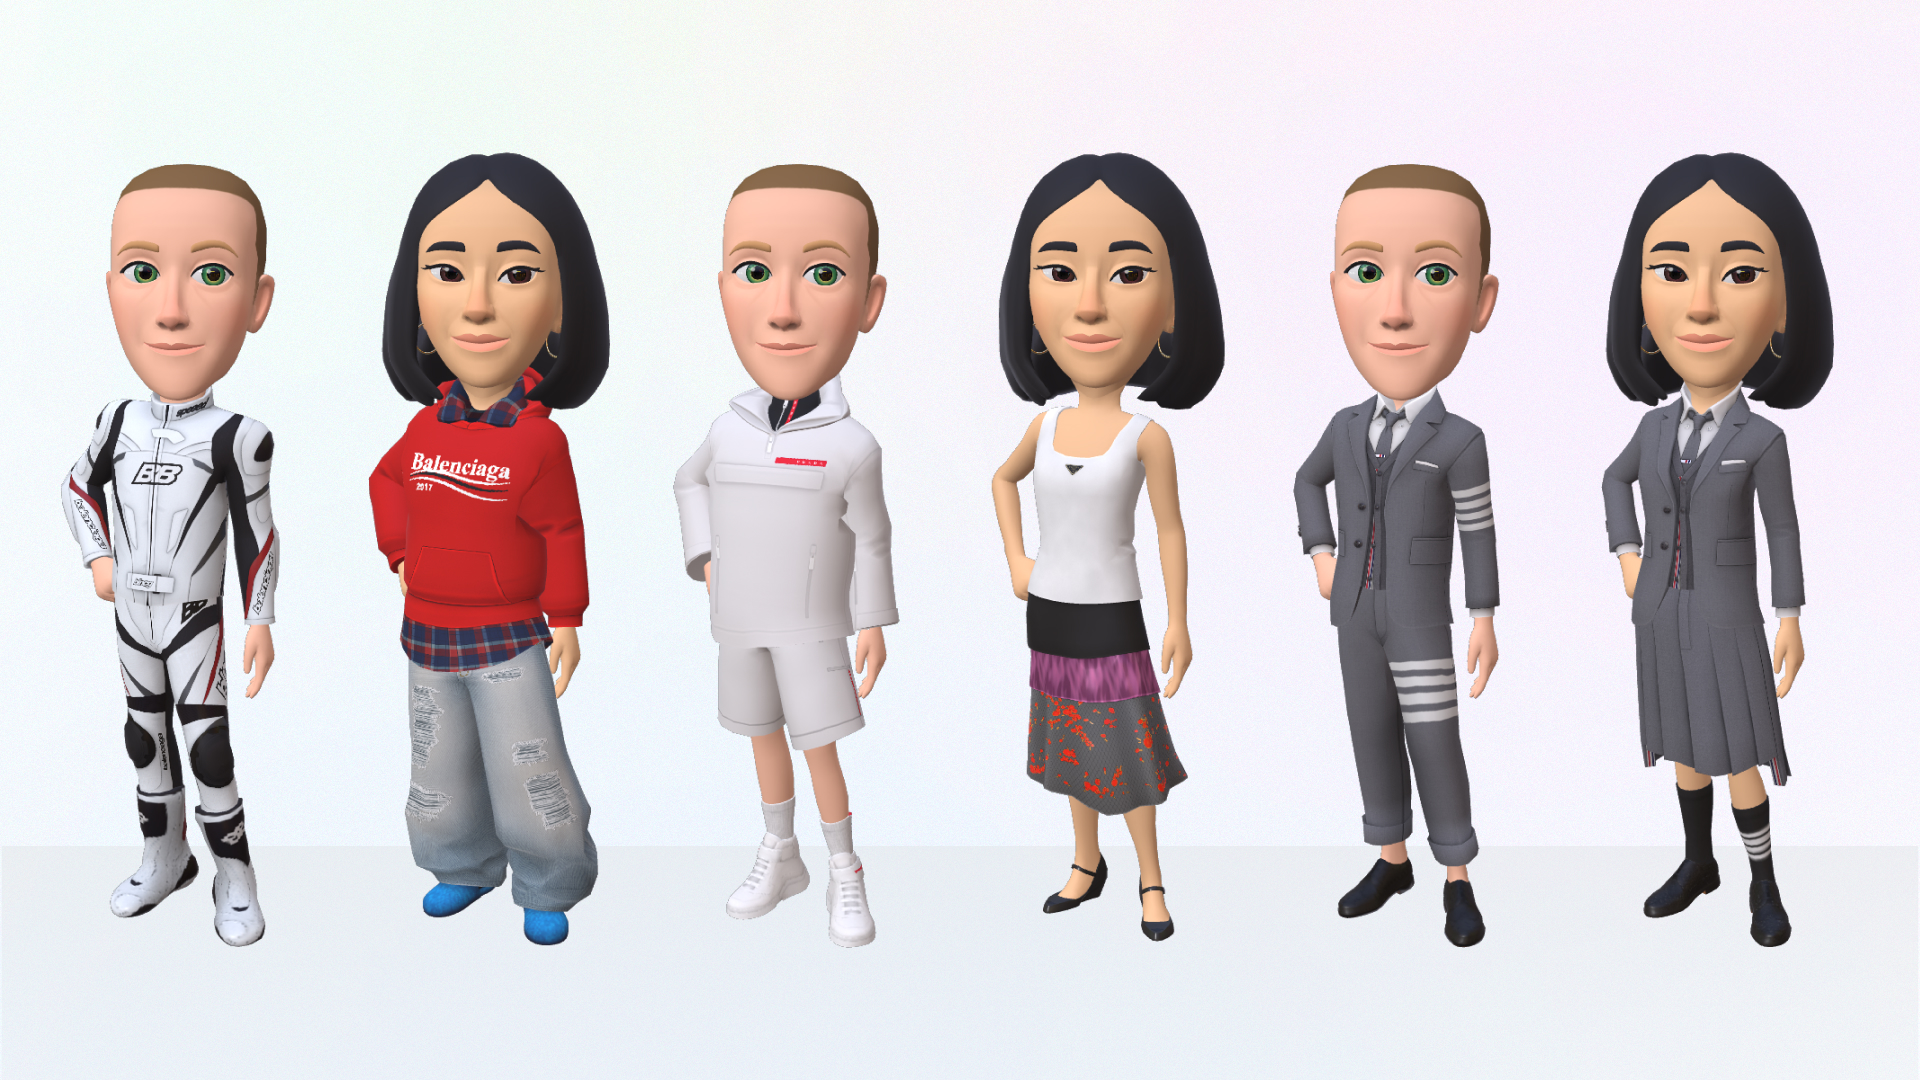 Microsoft Teams will let you attend meetings as a 3D avatar